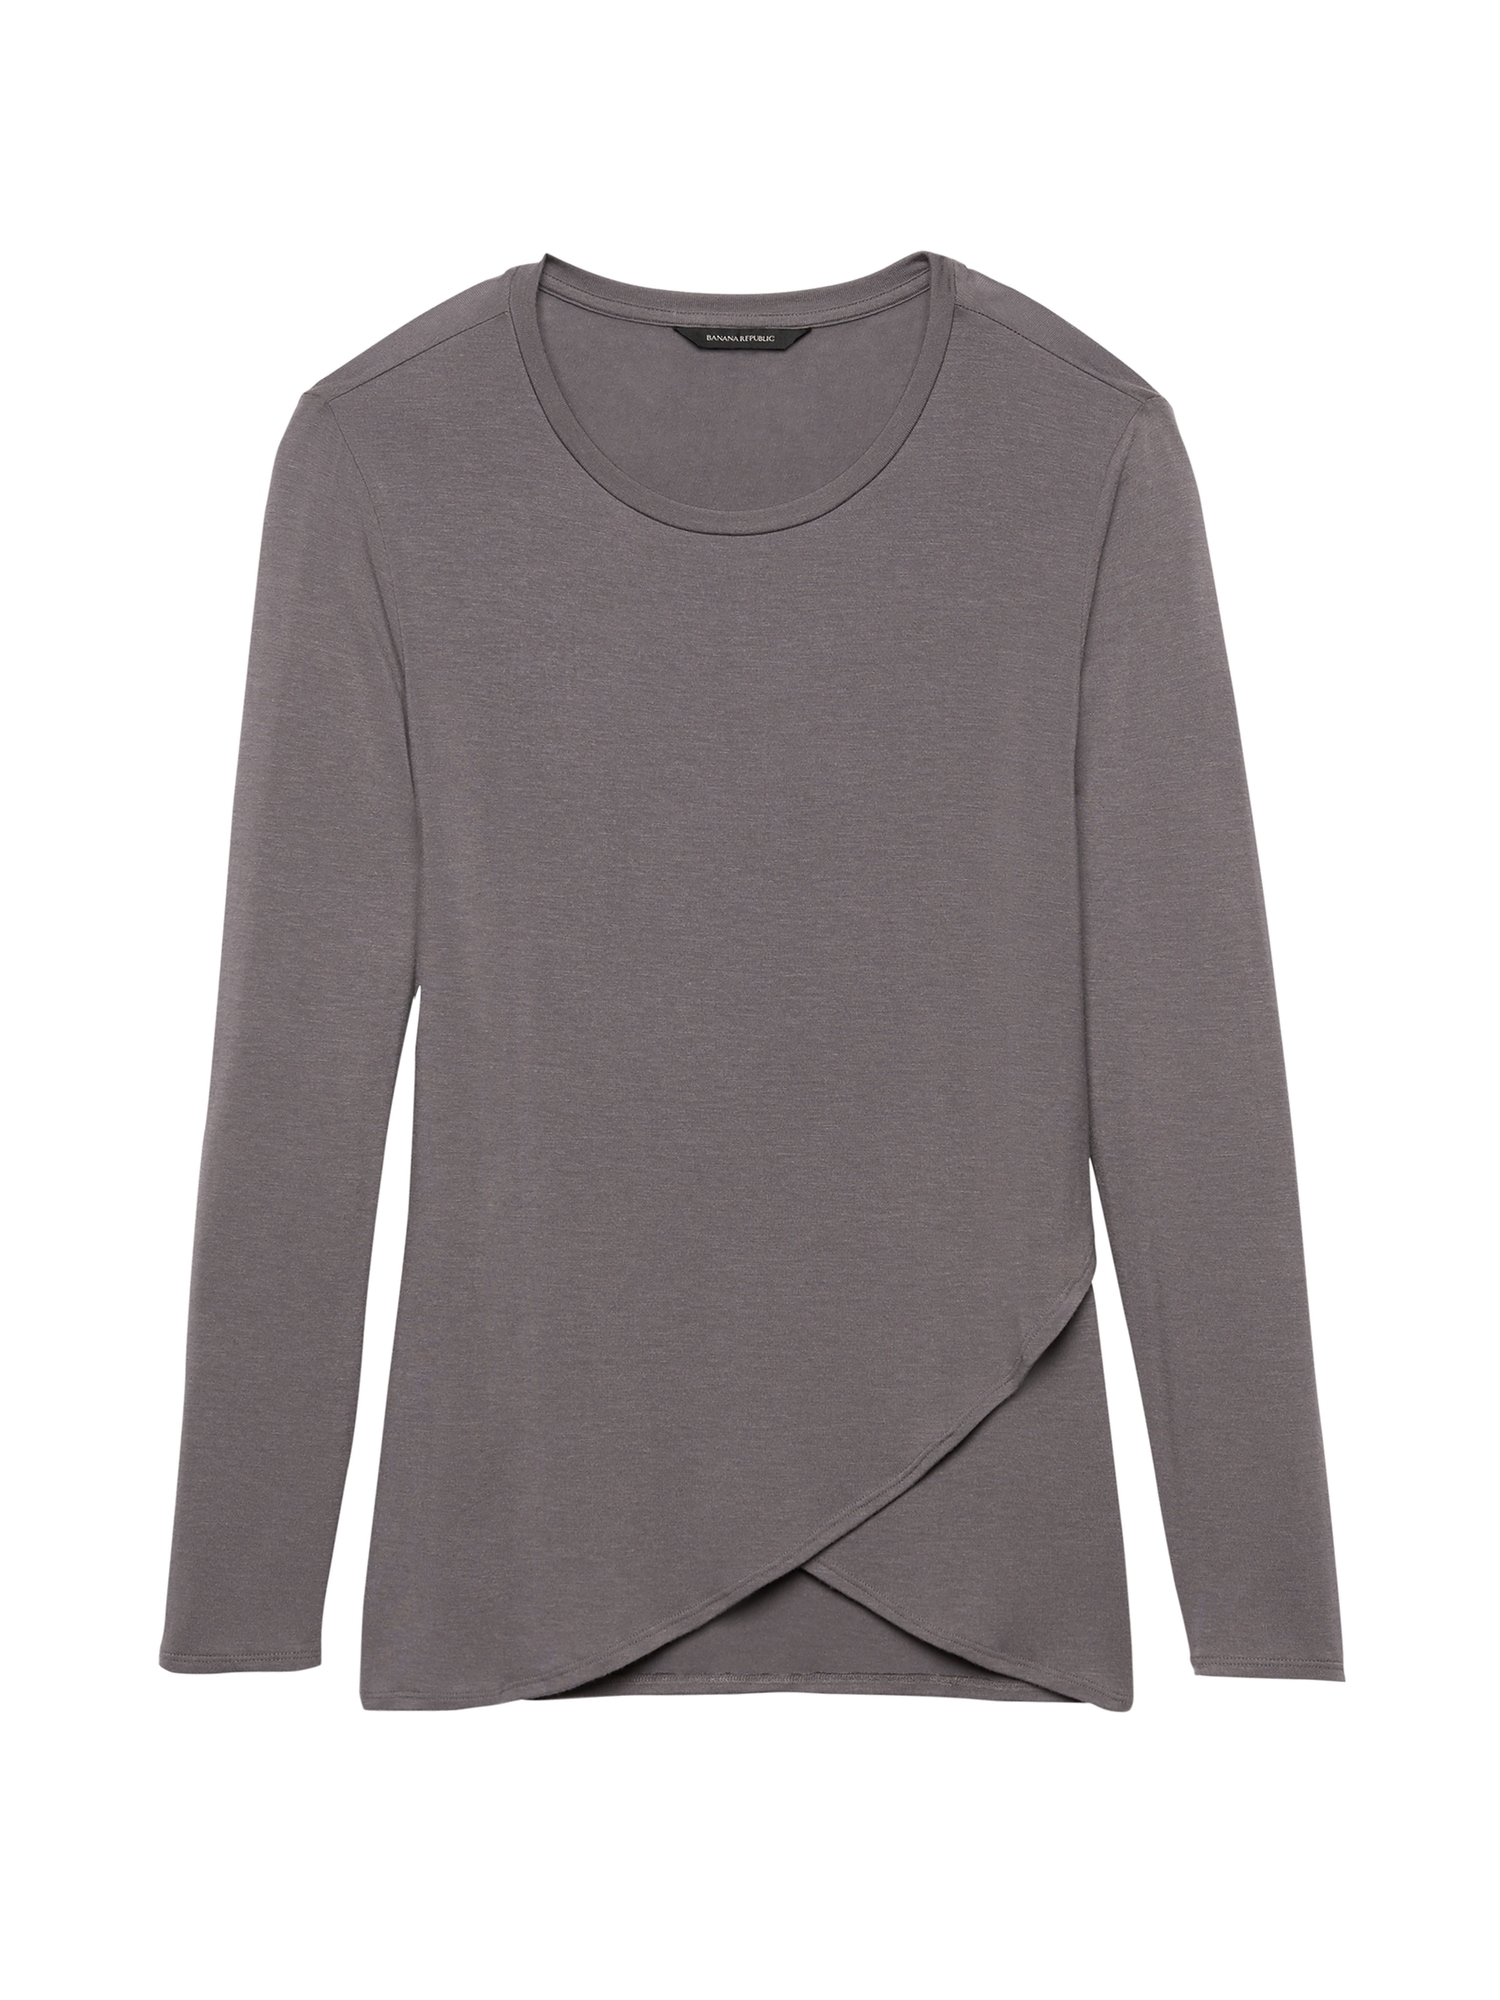 Soft Sustainable Modal Cross-Front T-Shirt